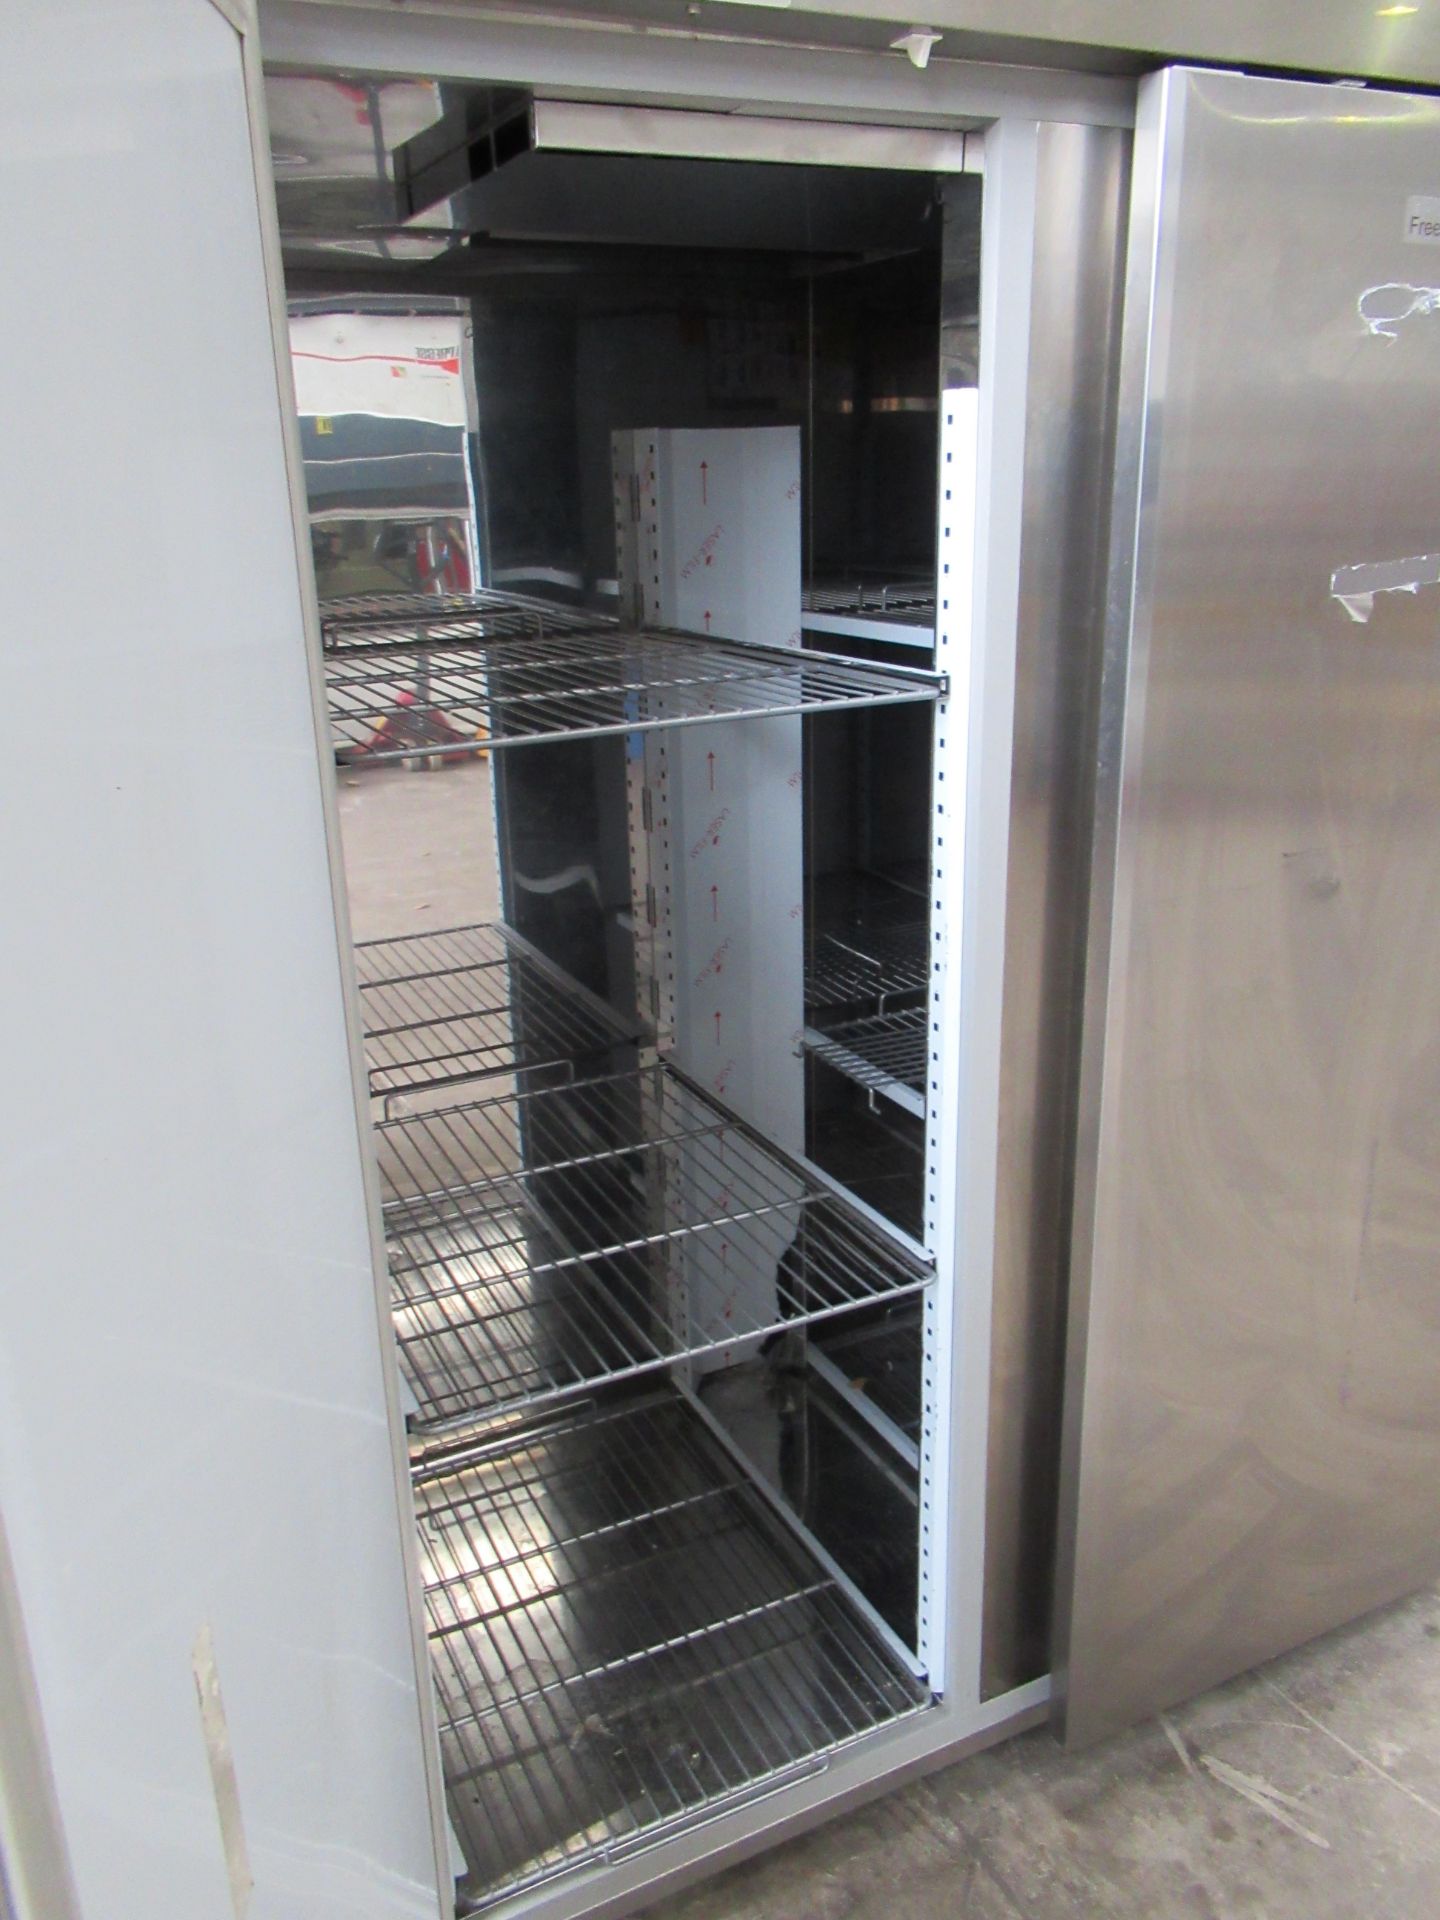 Electrolux Stainless Steel Double Door Commercial Freezer, YOM: 2013, Model RE4142FFG, Capacity 1430 - Image 3 of 6